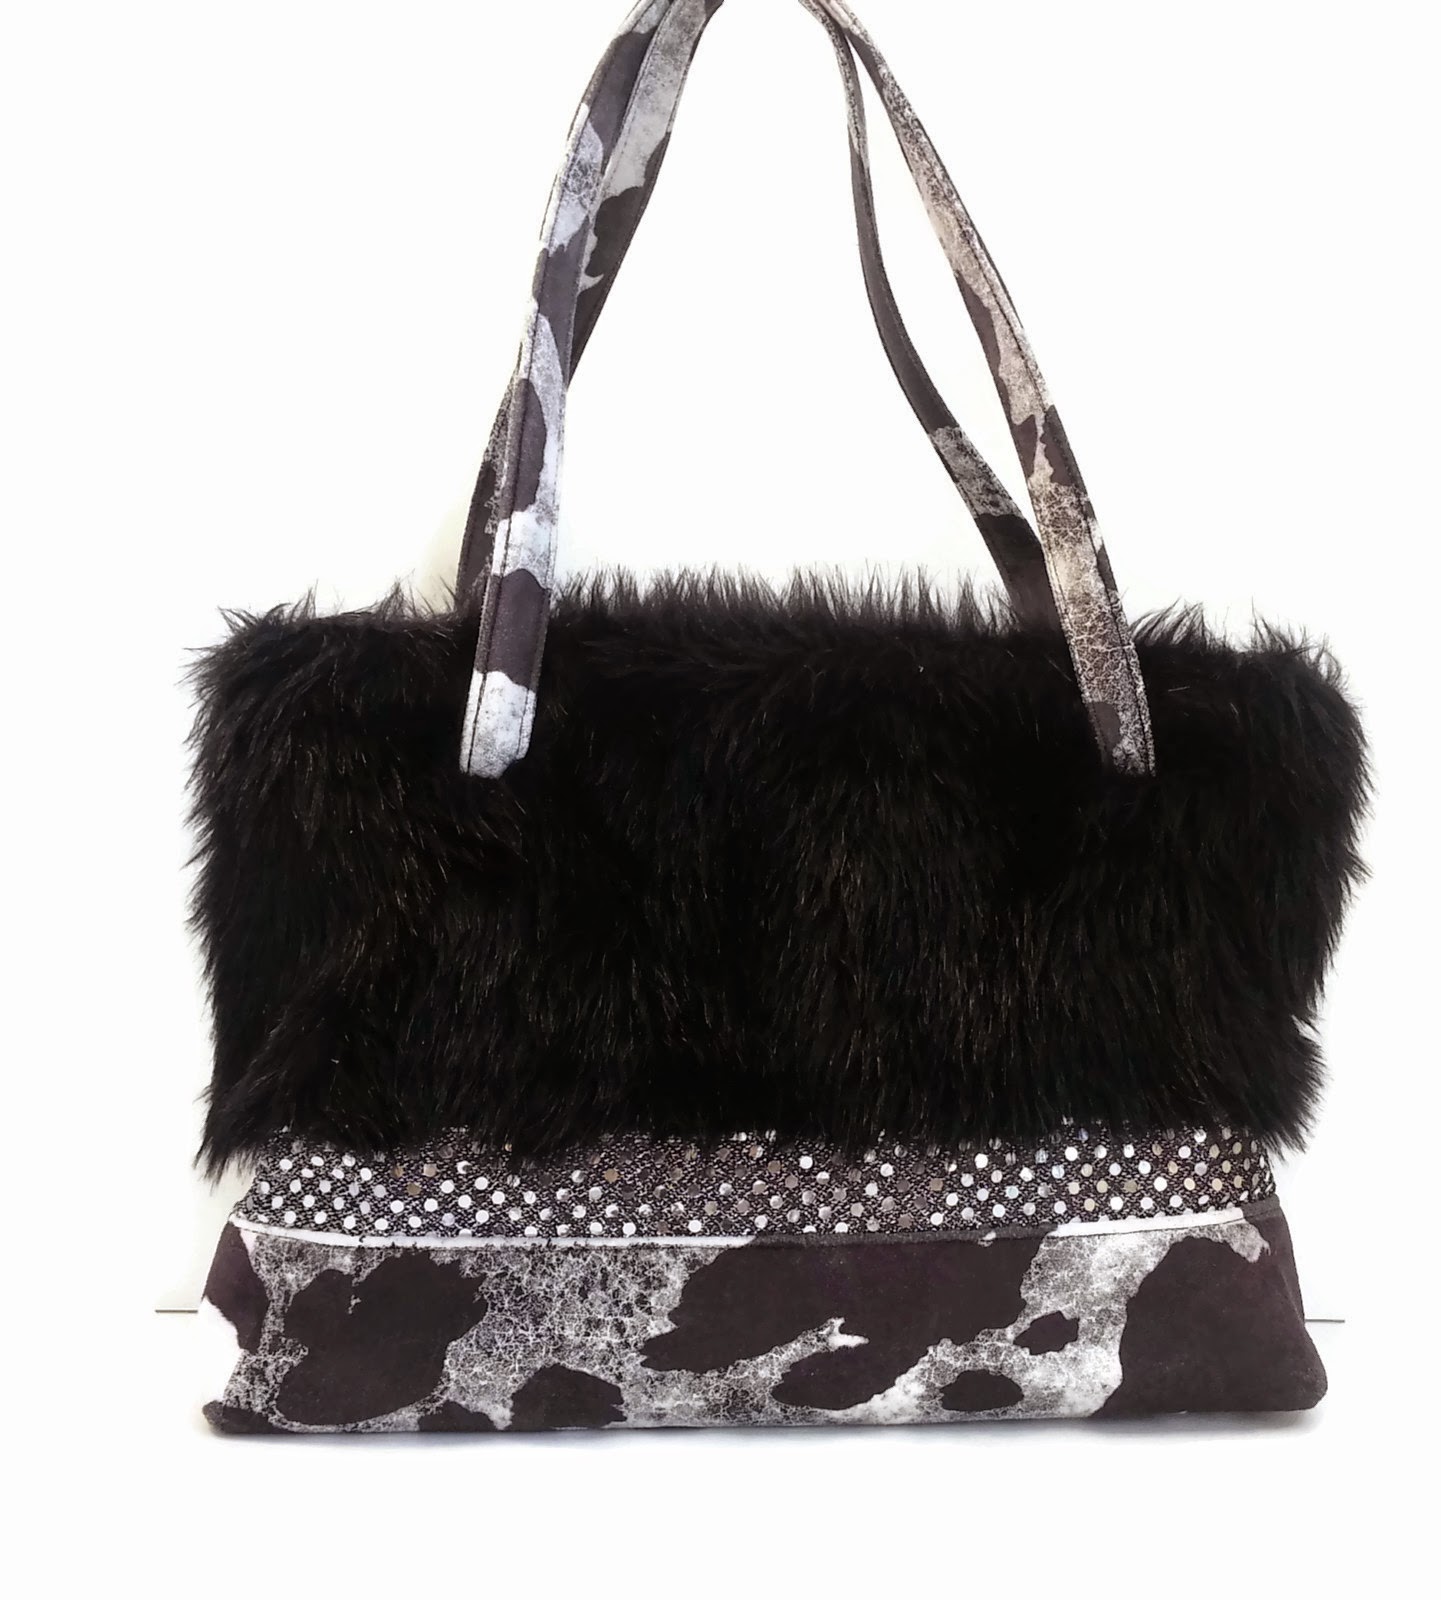  Large Faux Fur and Sequin Zipper Tote in My Faux Fur Frenzy Shop